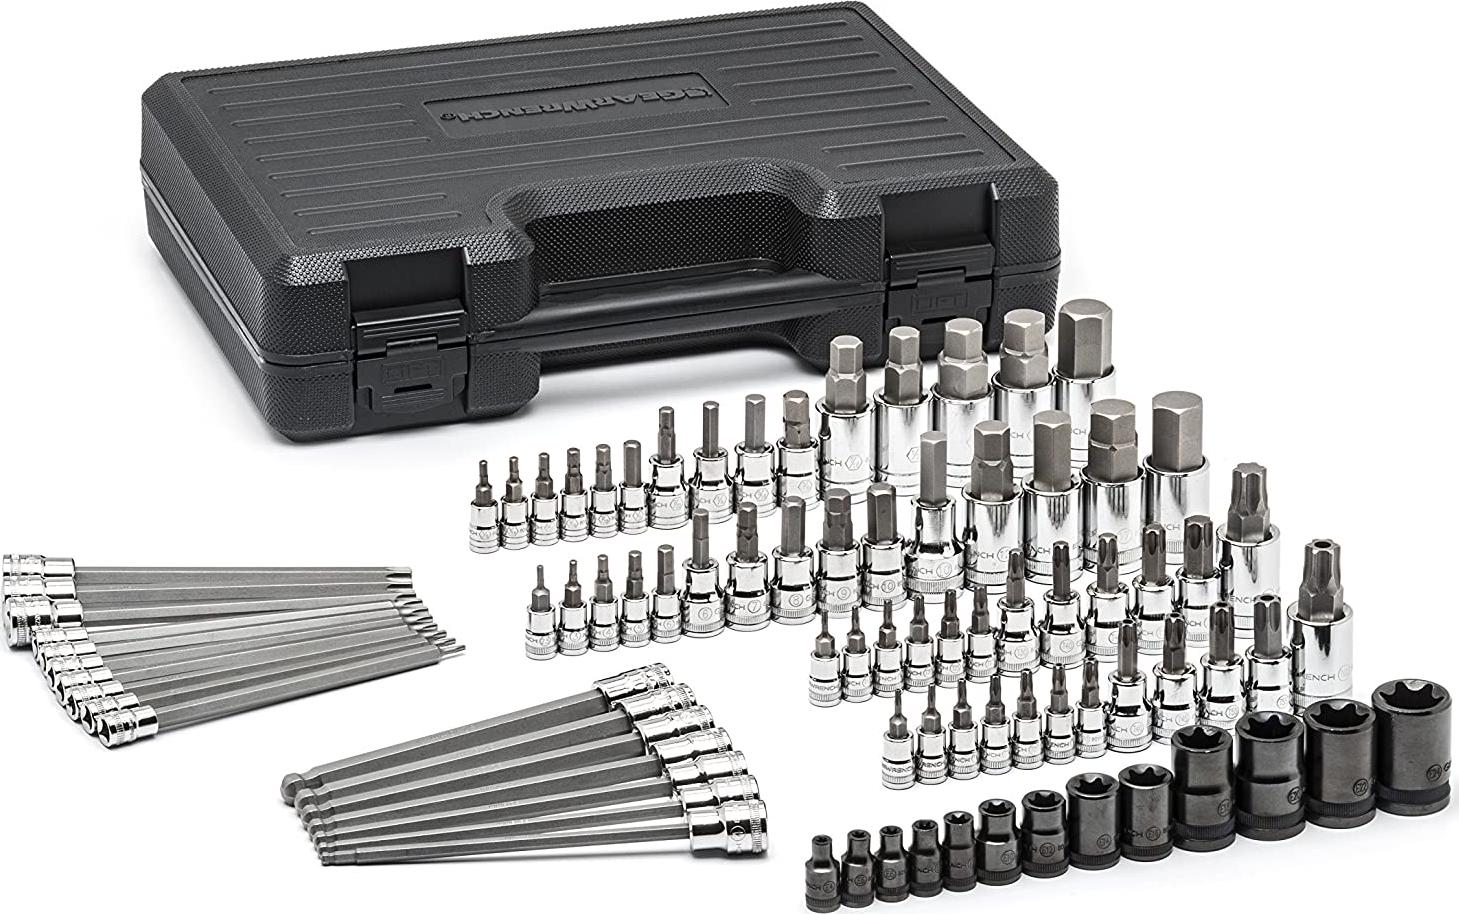 GEARWRENCH, Gearwrench Mixed Drive Size Hex and Torx Master Socket, 84-Pieces Set